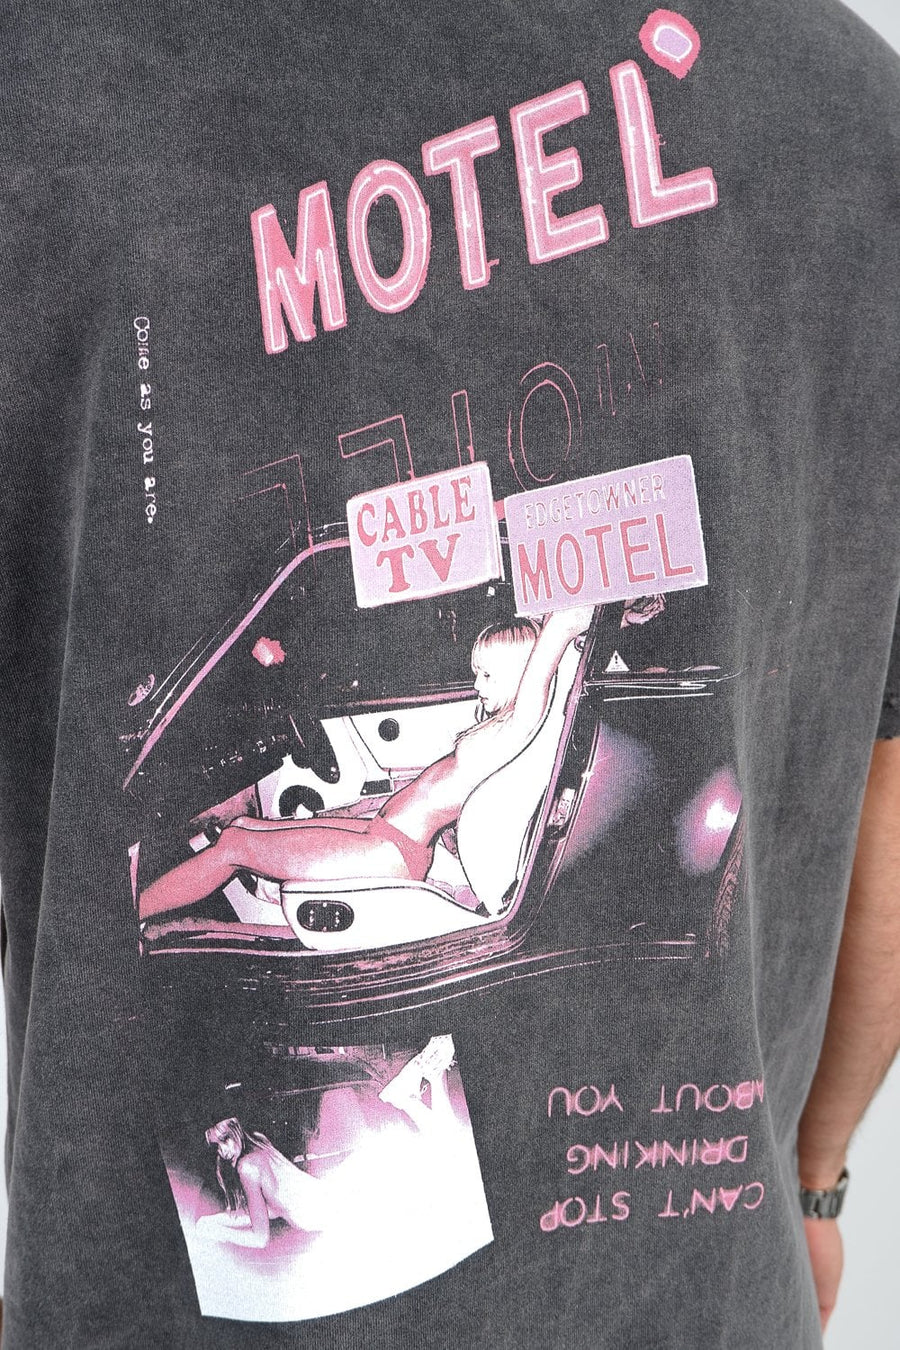 Buy the Off The Rails Motel T-Shirt in Vintage Black at Intro. Spend £50 for free UK delivery. Official stockists. We ship worldwide.